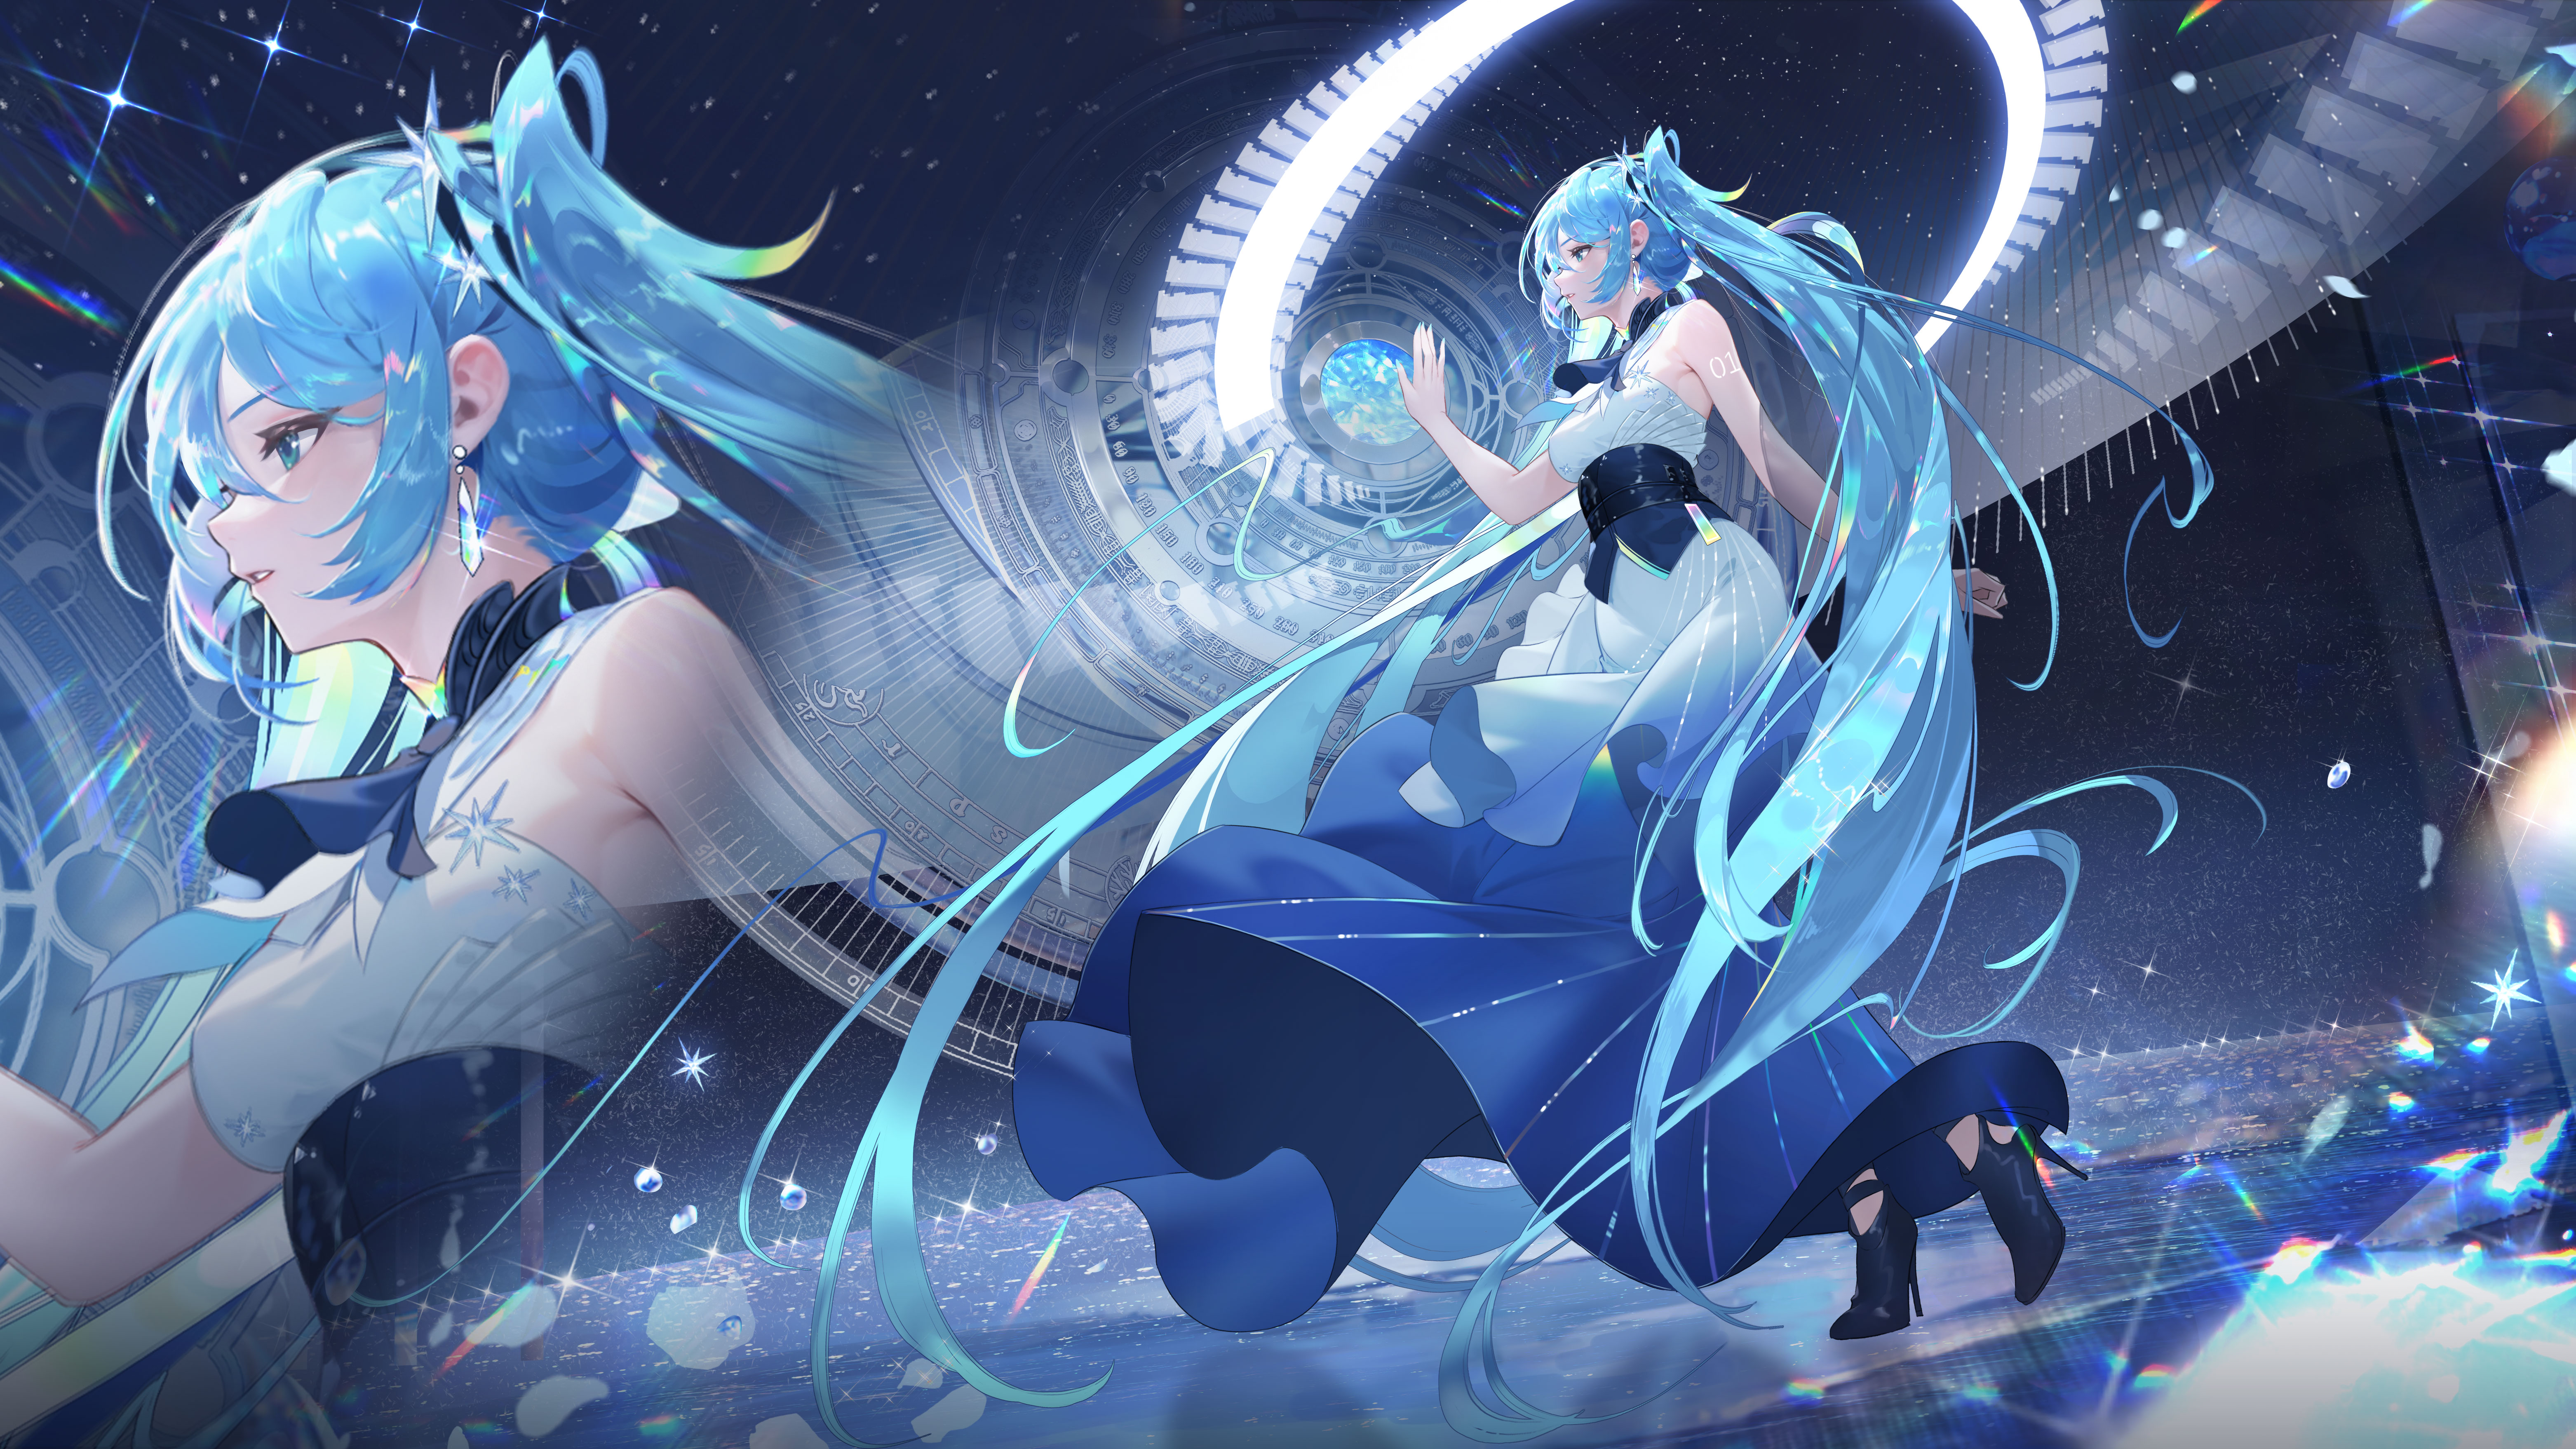 Anime 6249x3515 anime anime girls Hatsune Miku Vocaloid jie xiaoming long hair twintails blue hair looking away earring blue eyes bare shoulders heels walking water water drops parted lips dress stars frills numbers